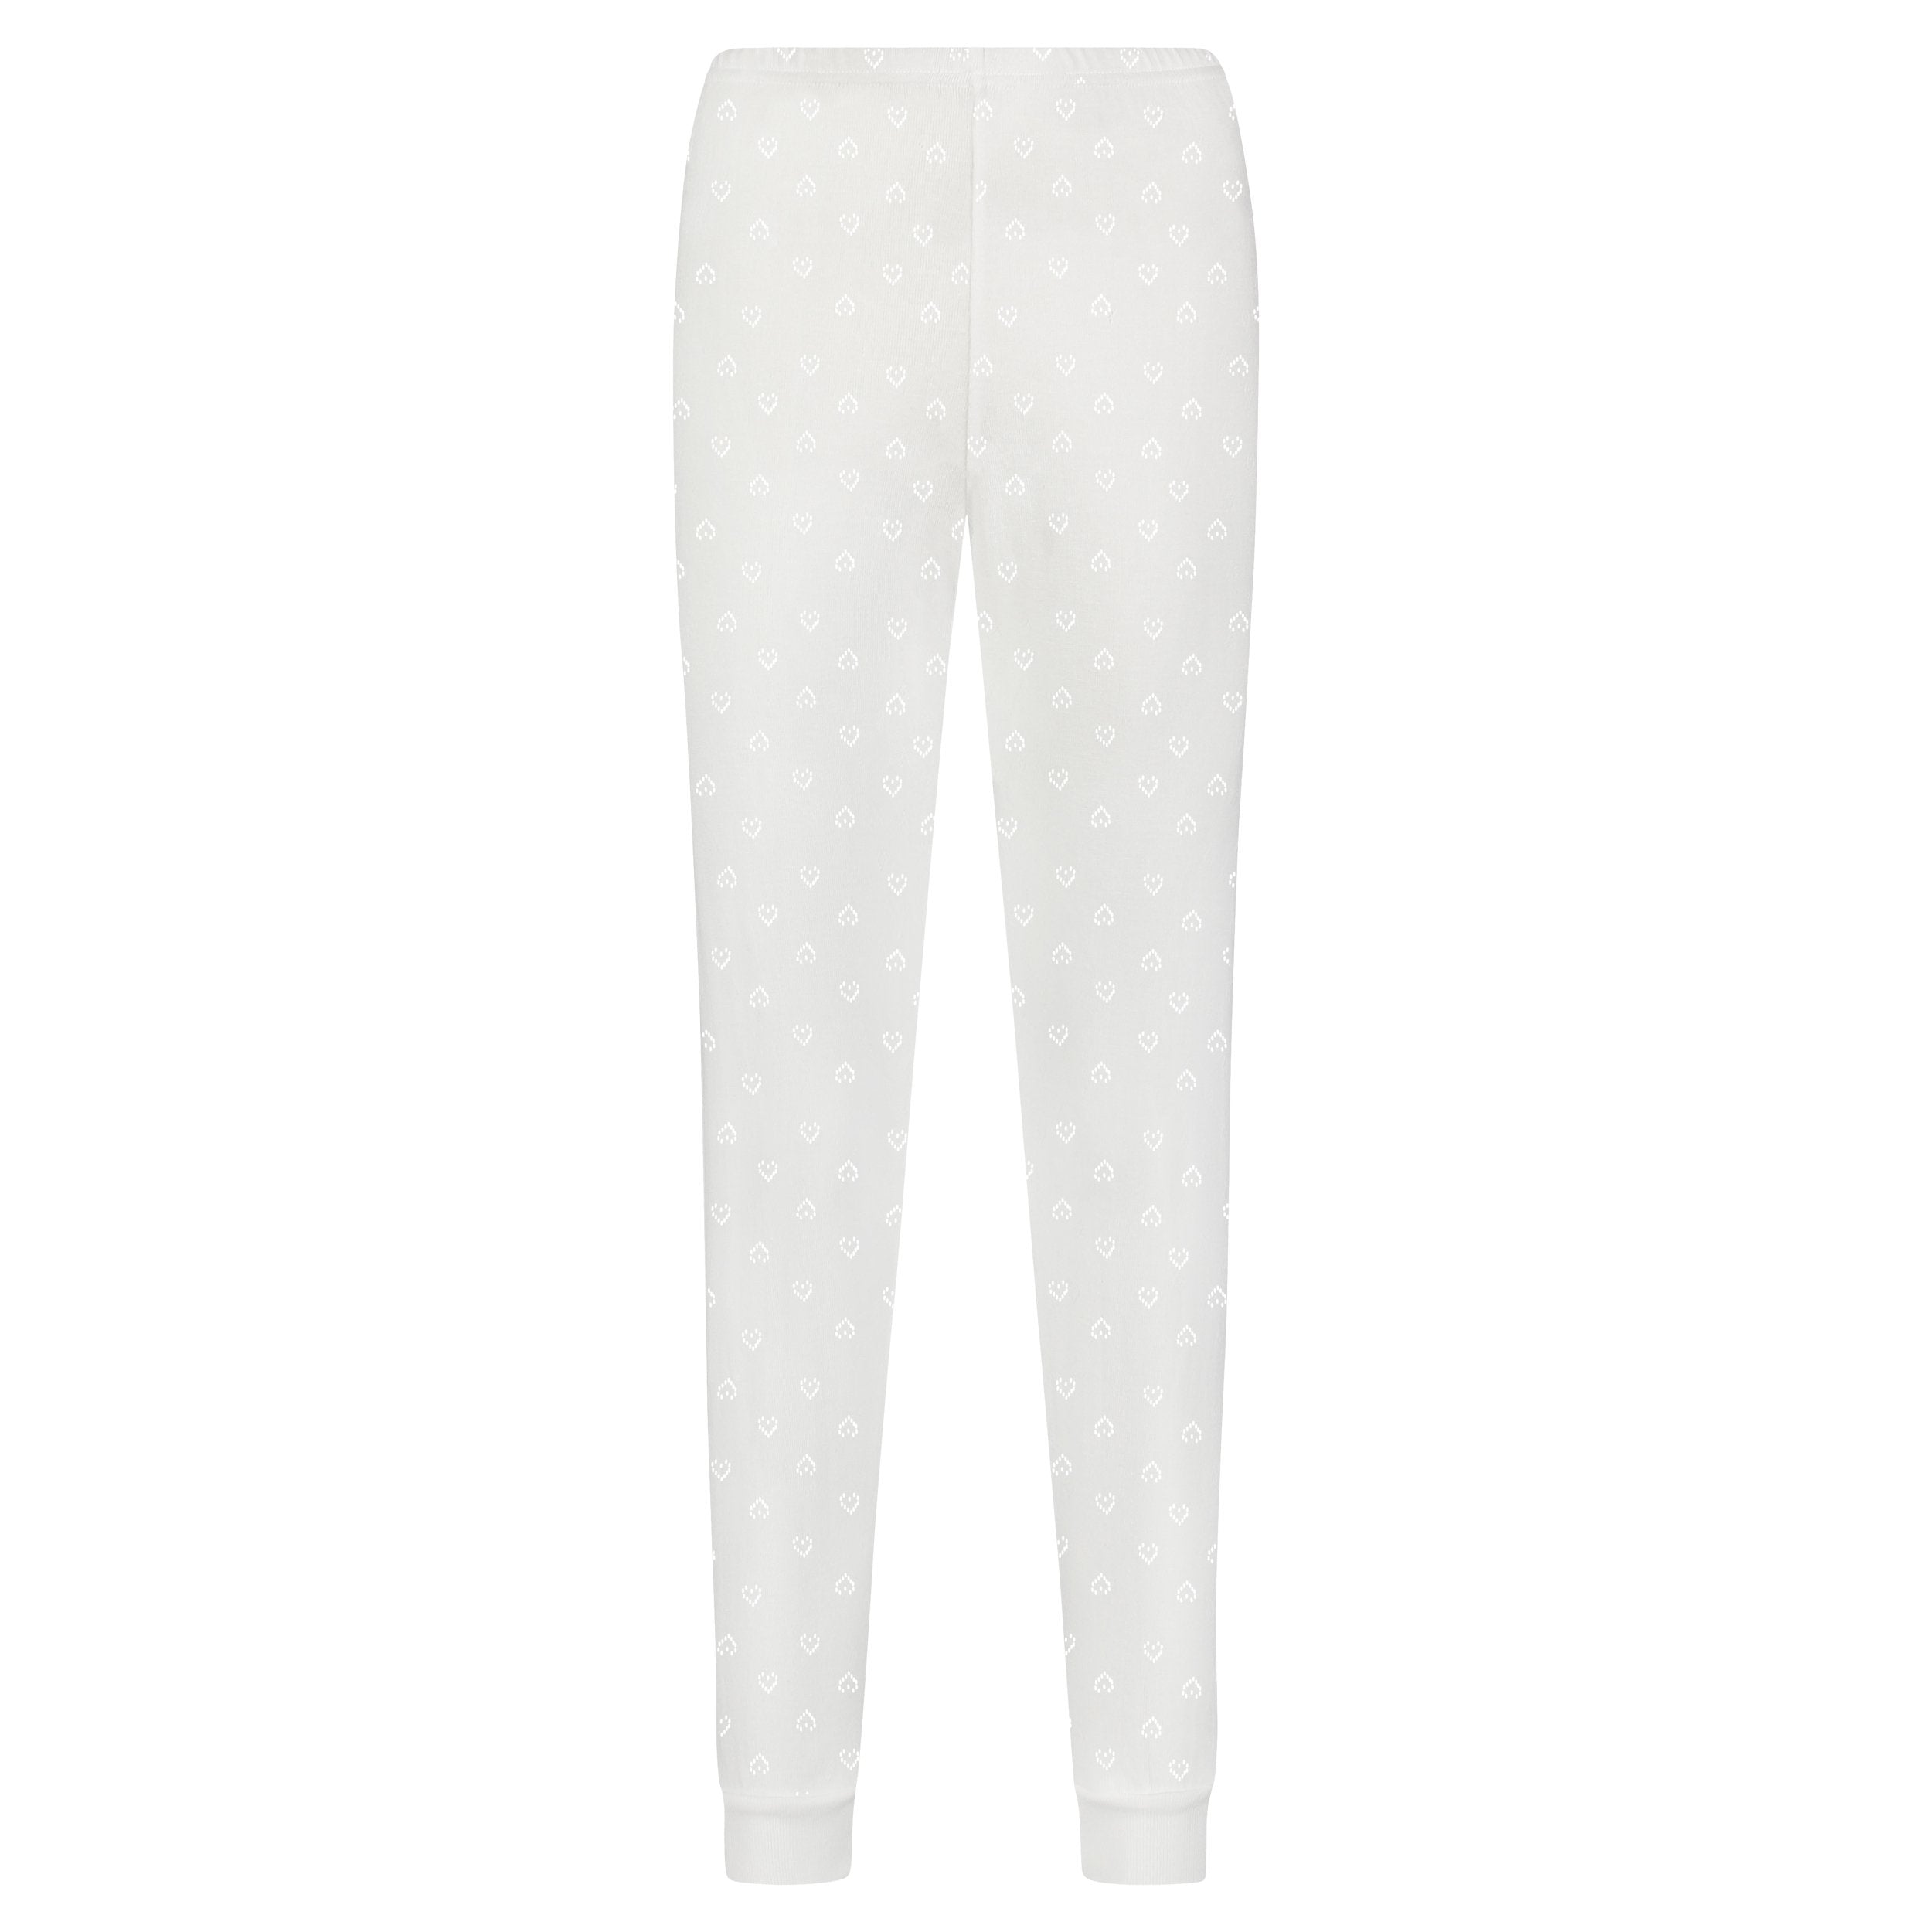 JOGGER Hi Rise Pearl White Vintage Hearts Pointelle New Fit